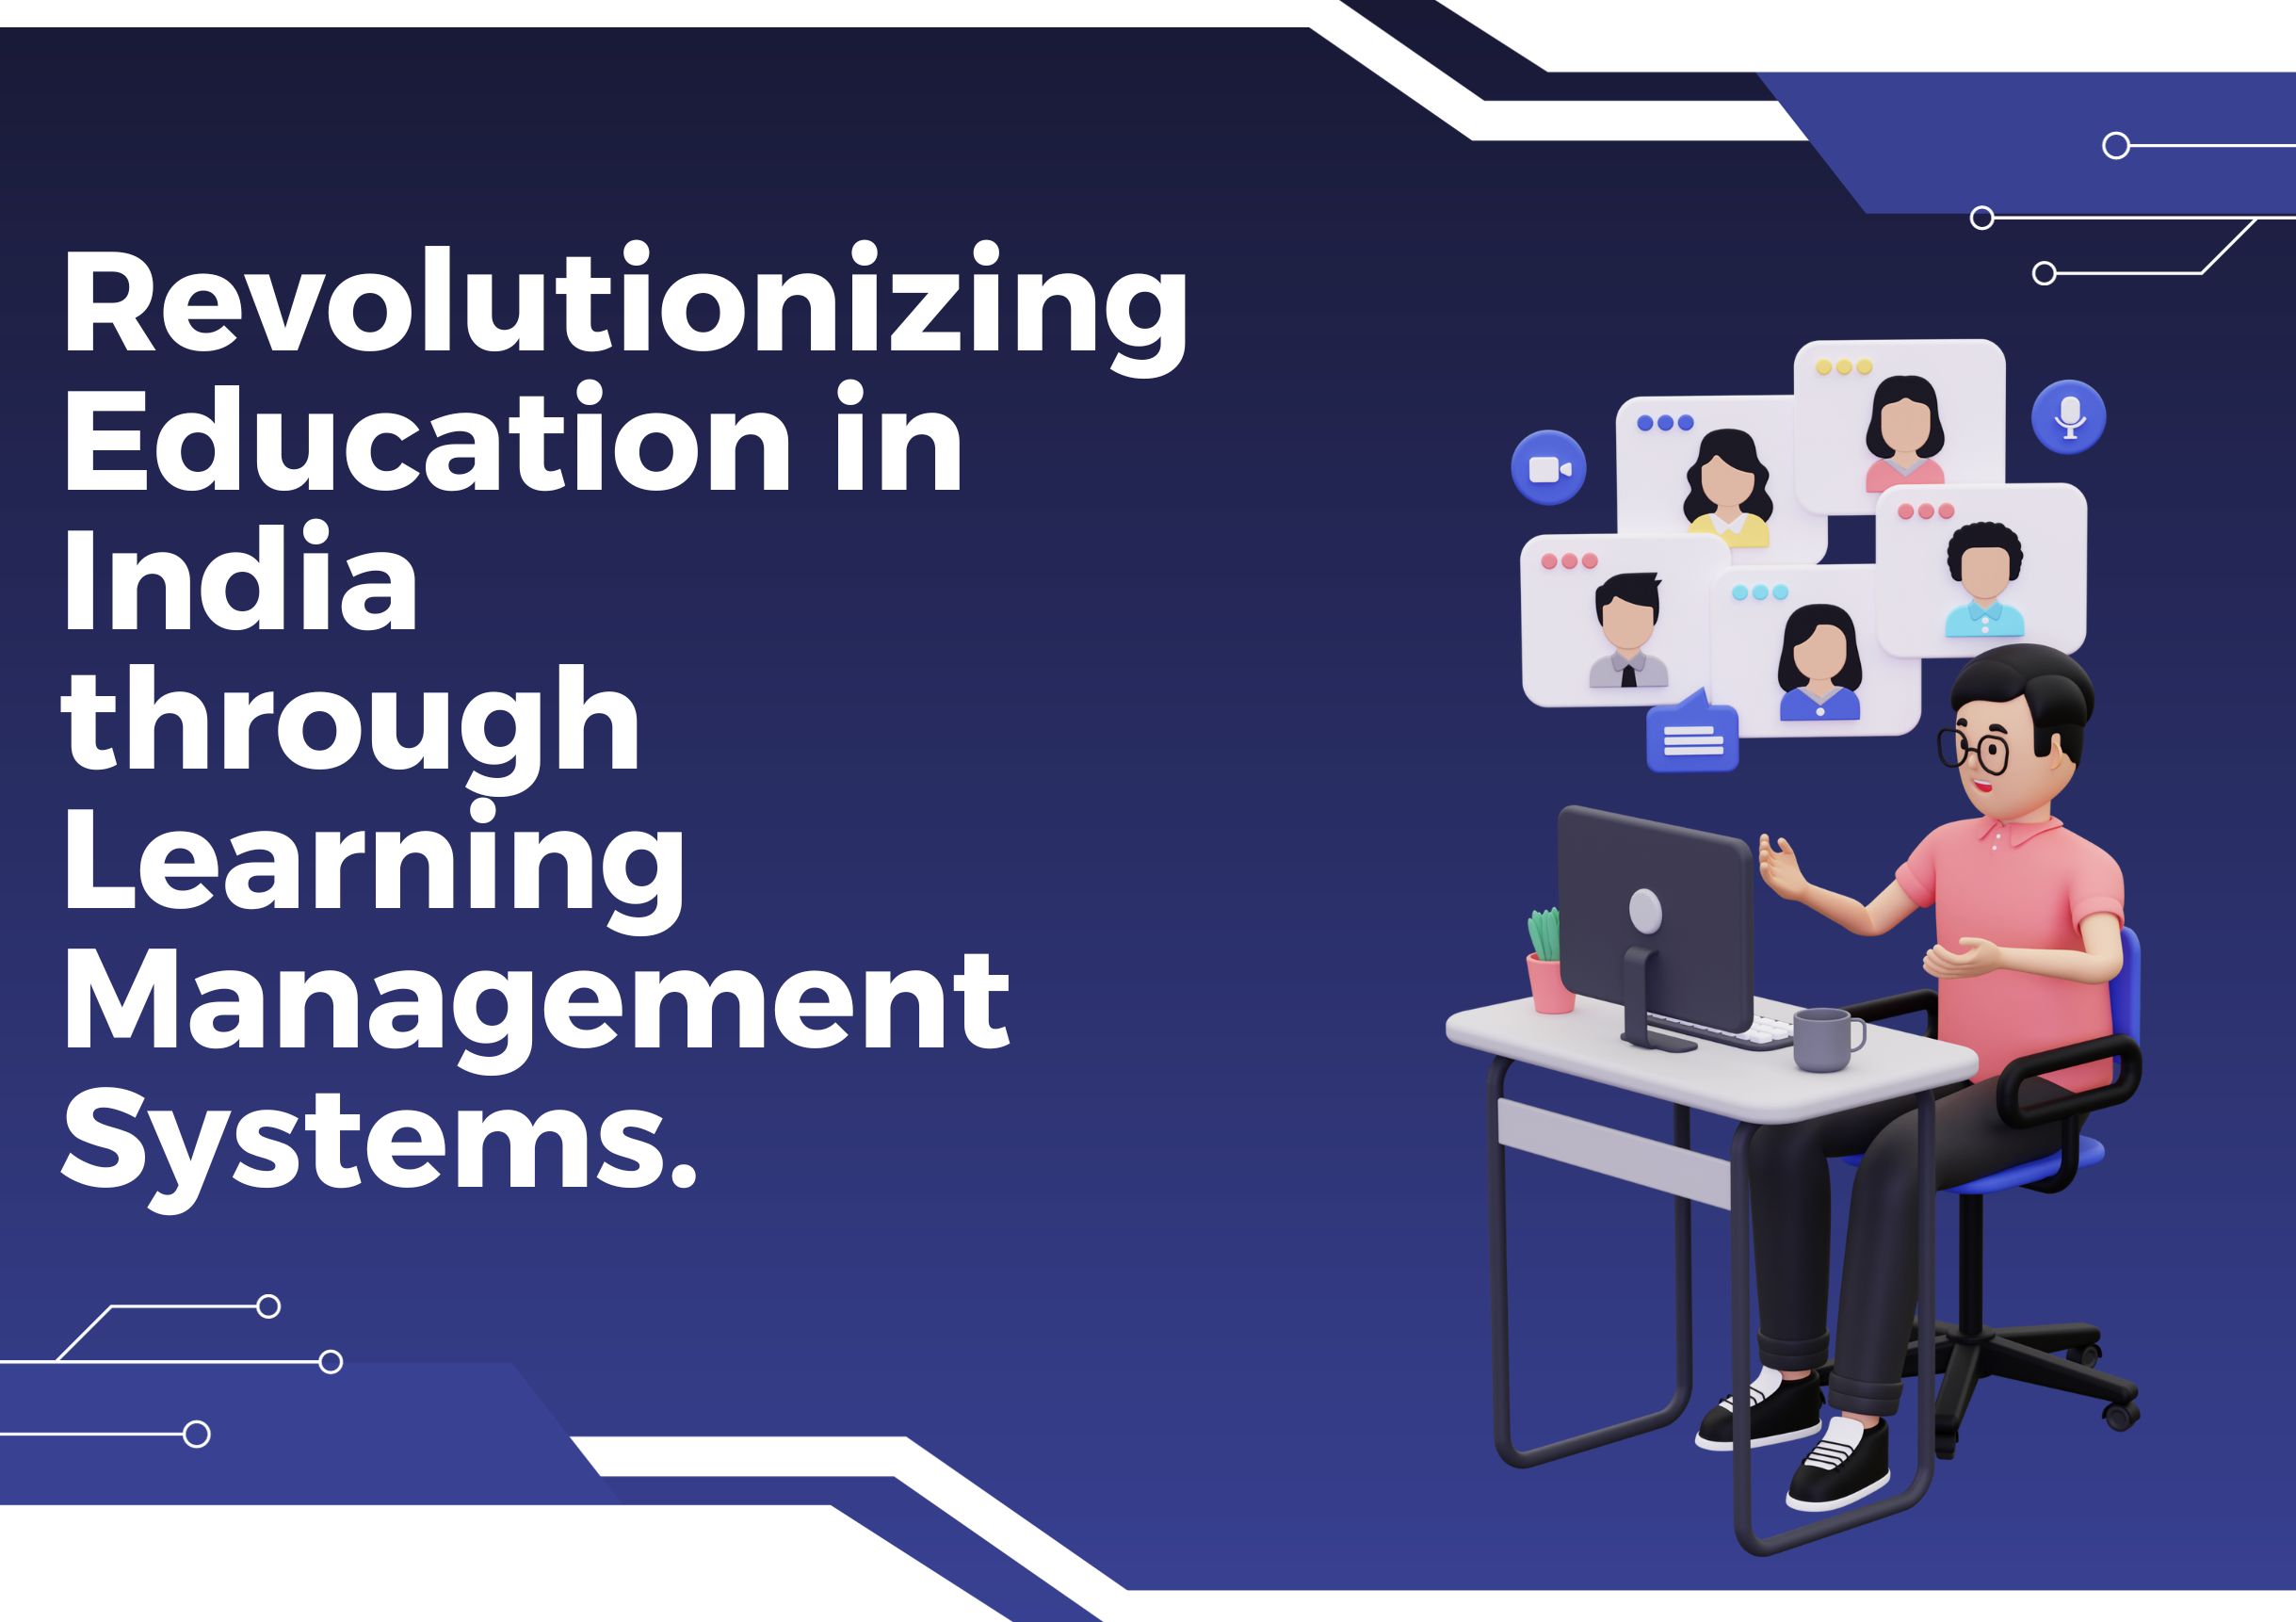 Learning management system in India